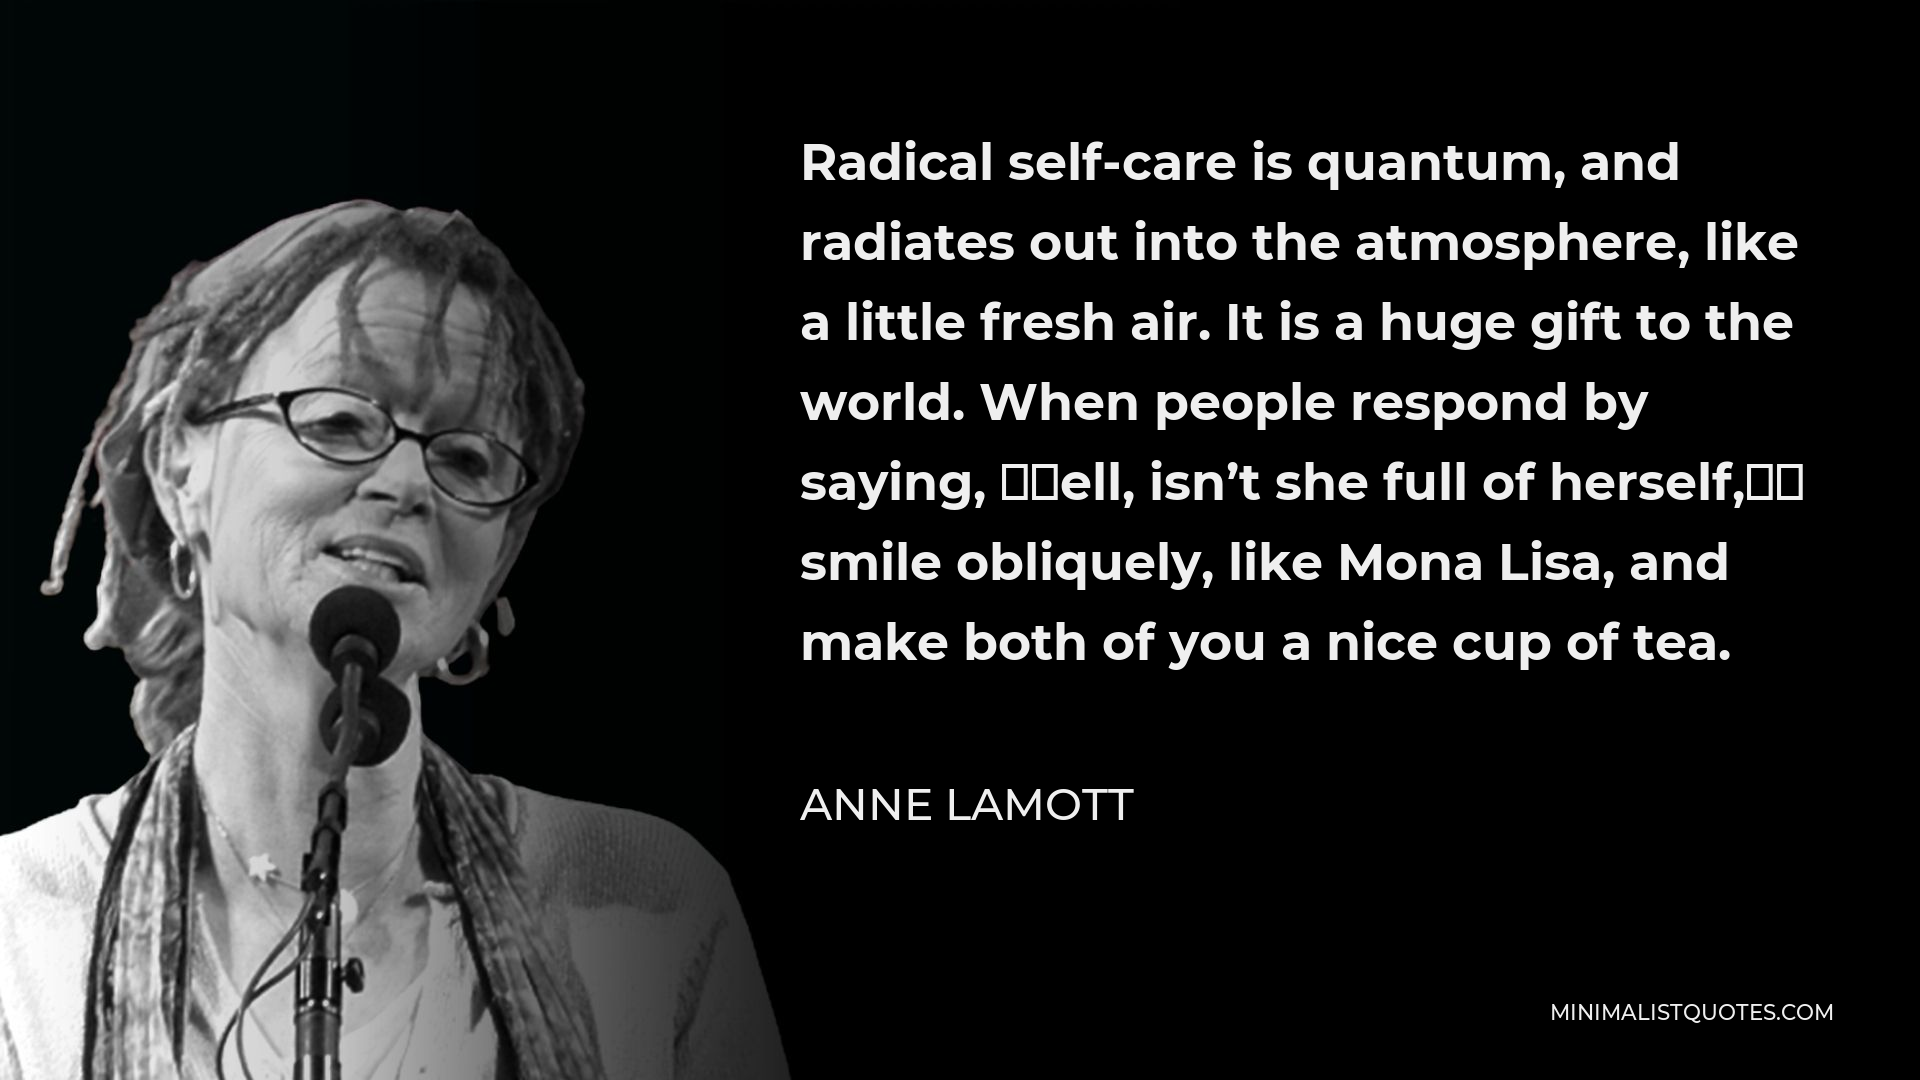 Anne Lamott Quote - Radical self-care is quantum, and radiates out into the atmosphere, like a little fresh air. It is a huge gift to the world. When people respond by saying, “Well, isn’t she full of herself,” smile obliquely, like Mona Lisa, and make both of you a nice cup of tea.